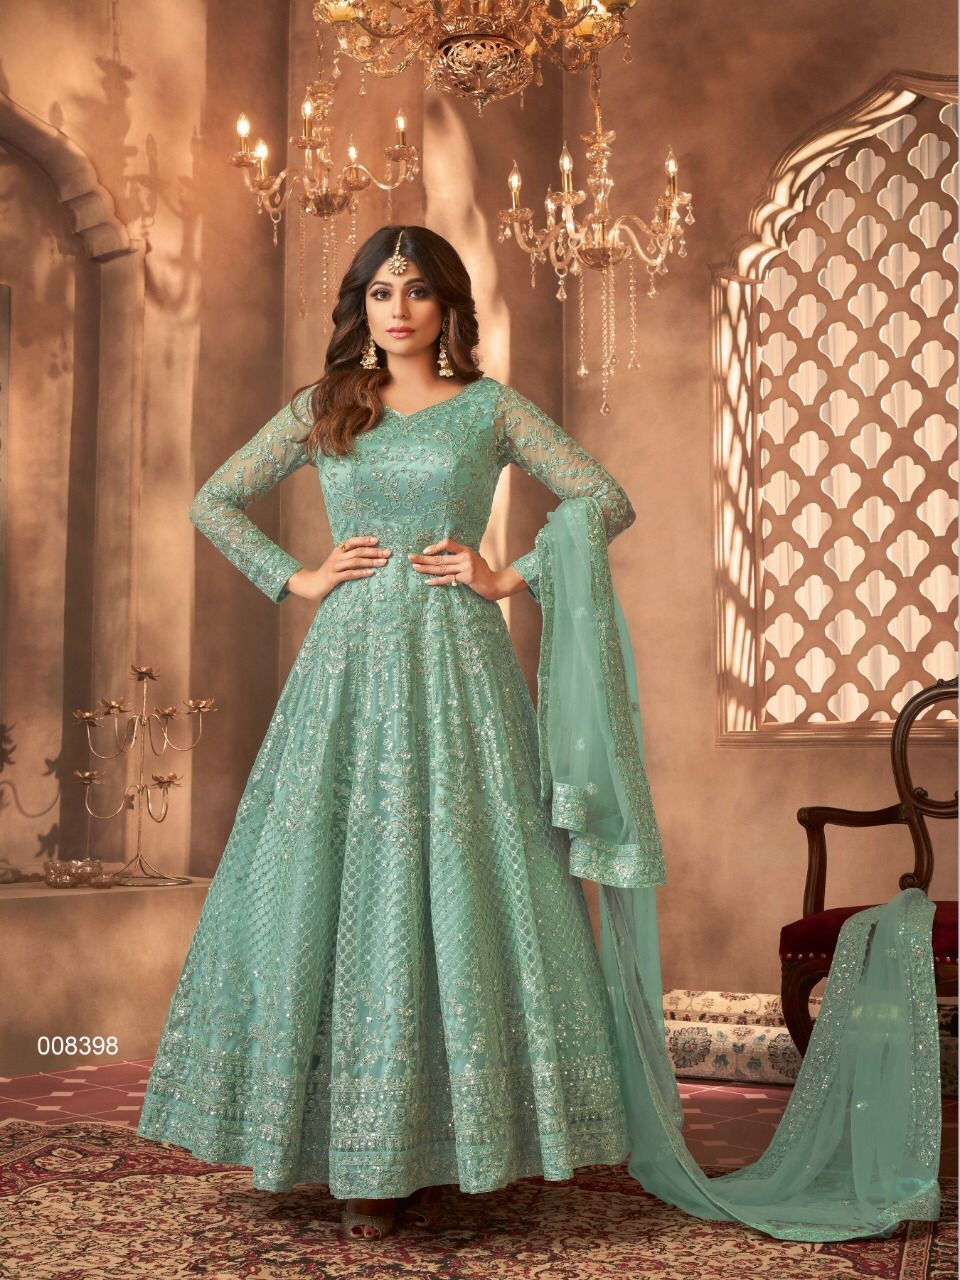 BEAUTIFUL HEAVY NET WITH SEQUENCE GOWN